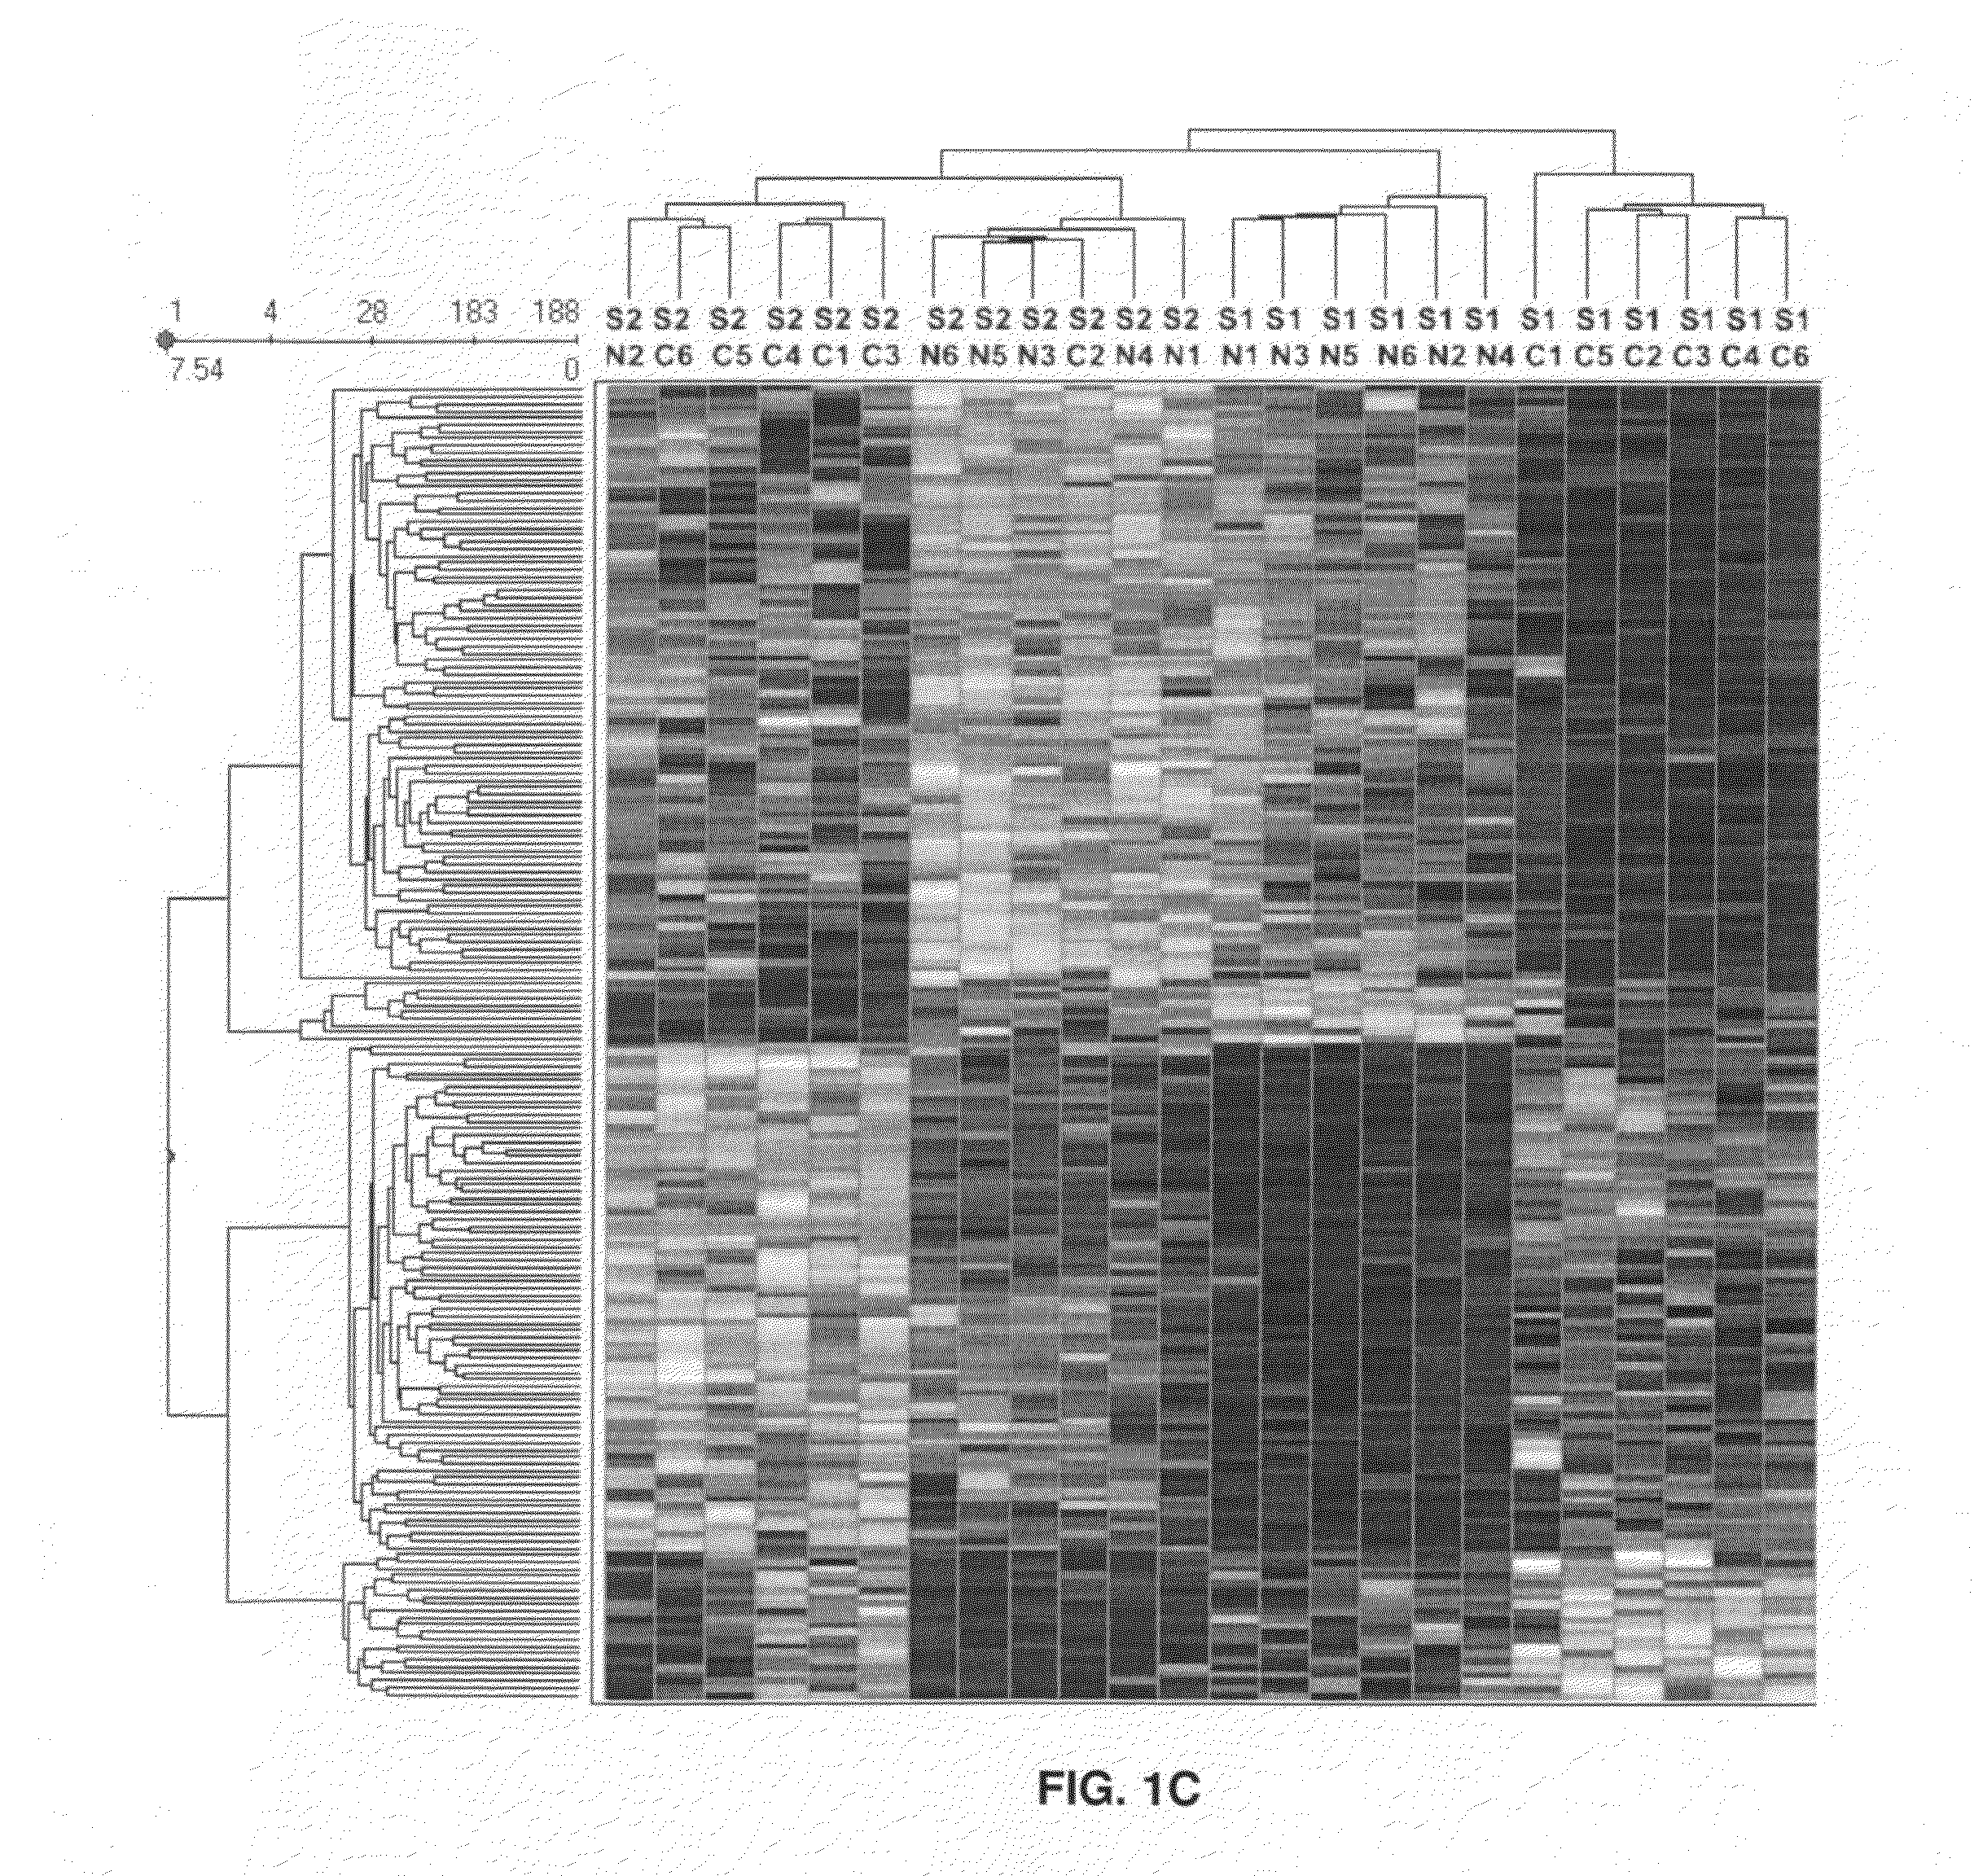 Methods for detecting, diagnosing and treating human renal cell carcinoma